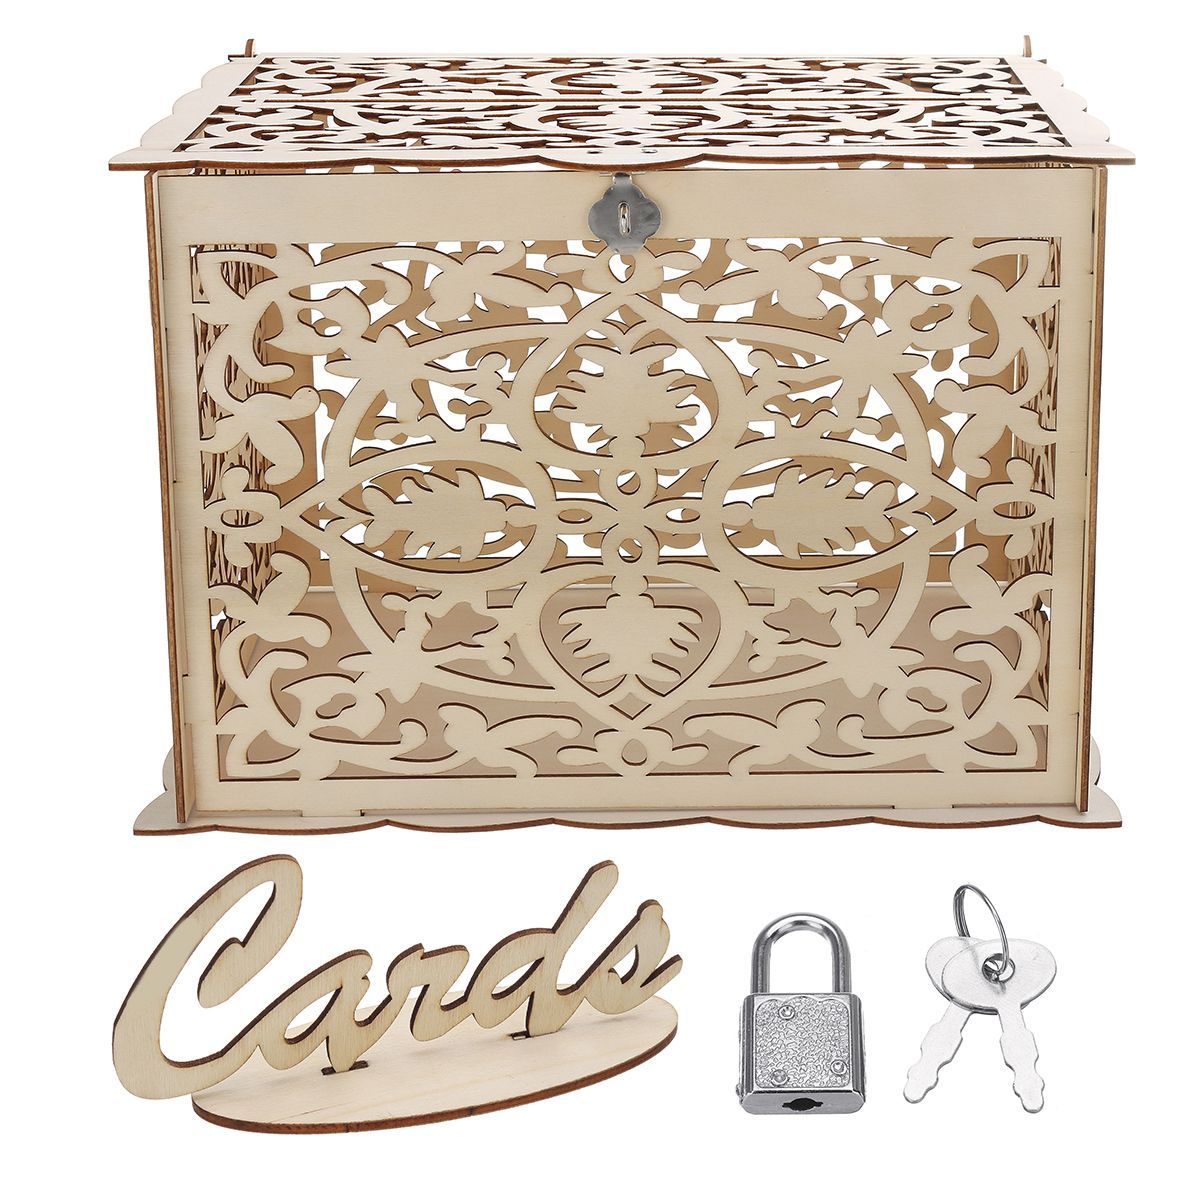 Wooden-Wedding-Card-Post-Box-with-Lock-Collection-Gift-Card-Boxes-Weddings-Decor-Supplies-1507983